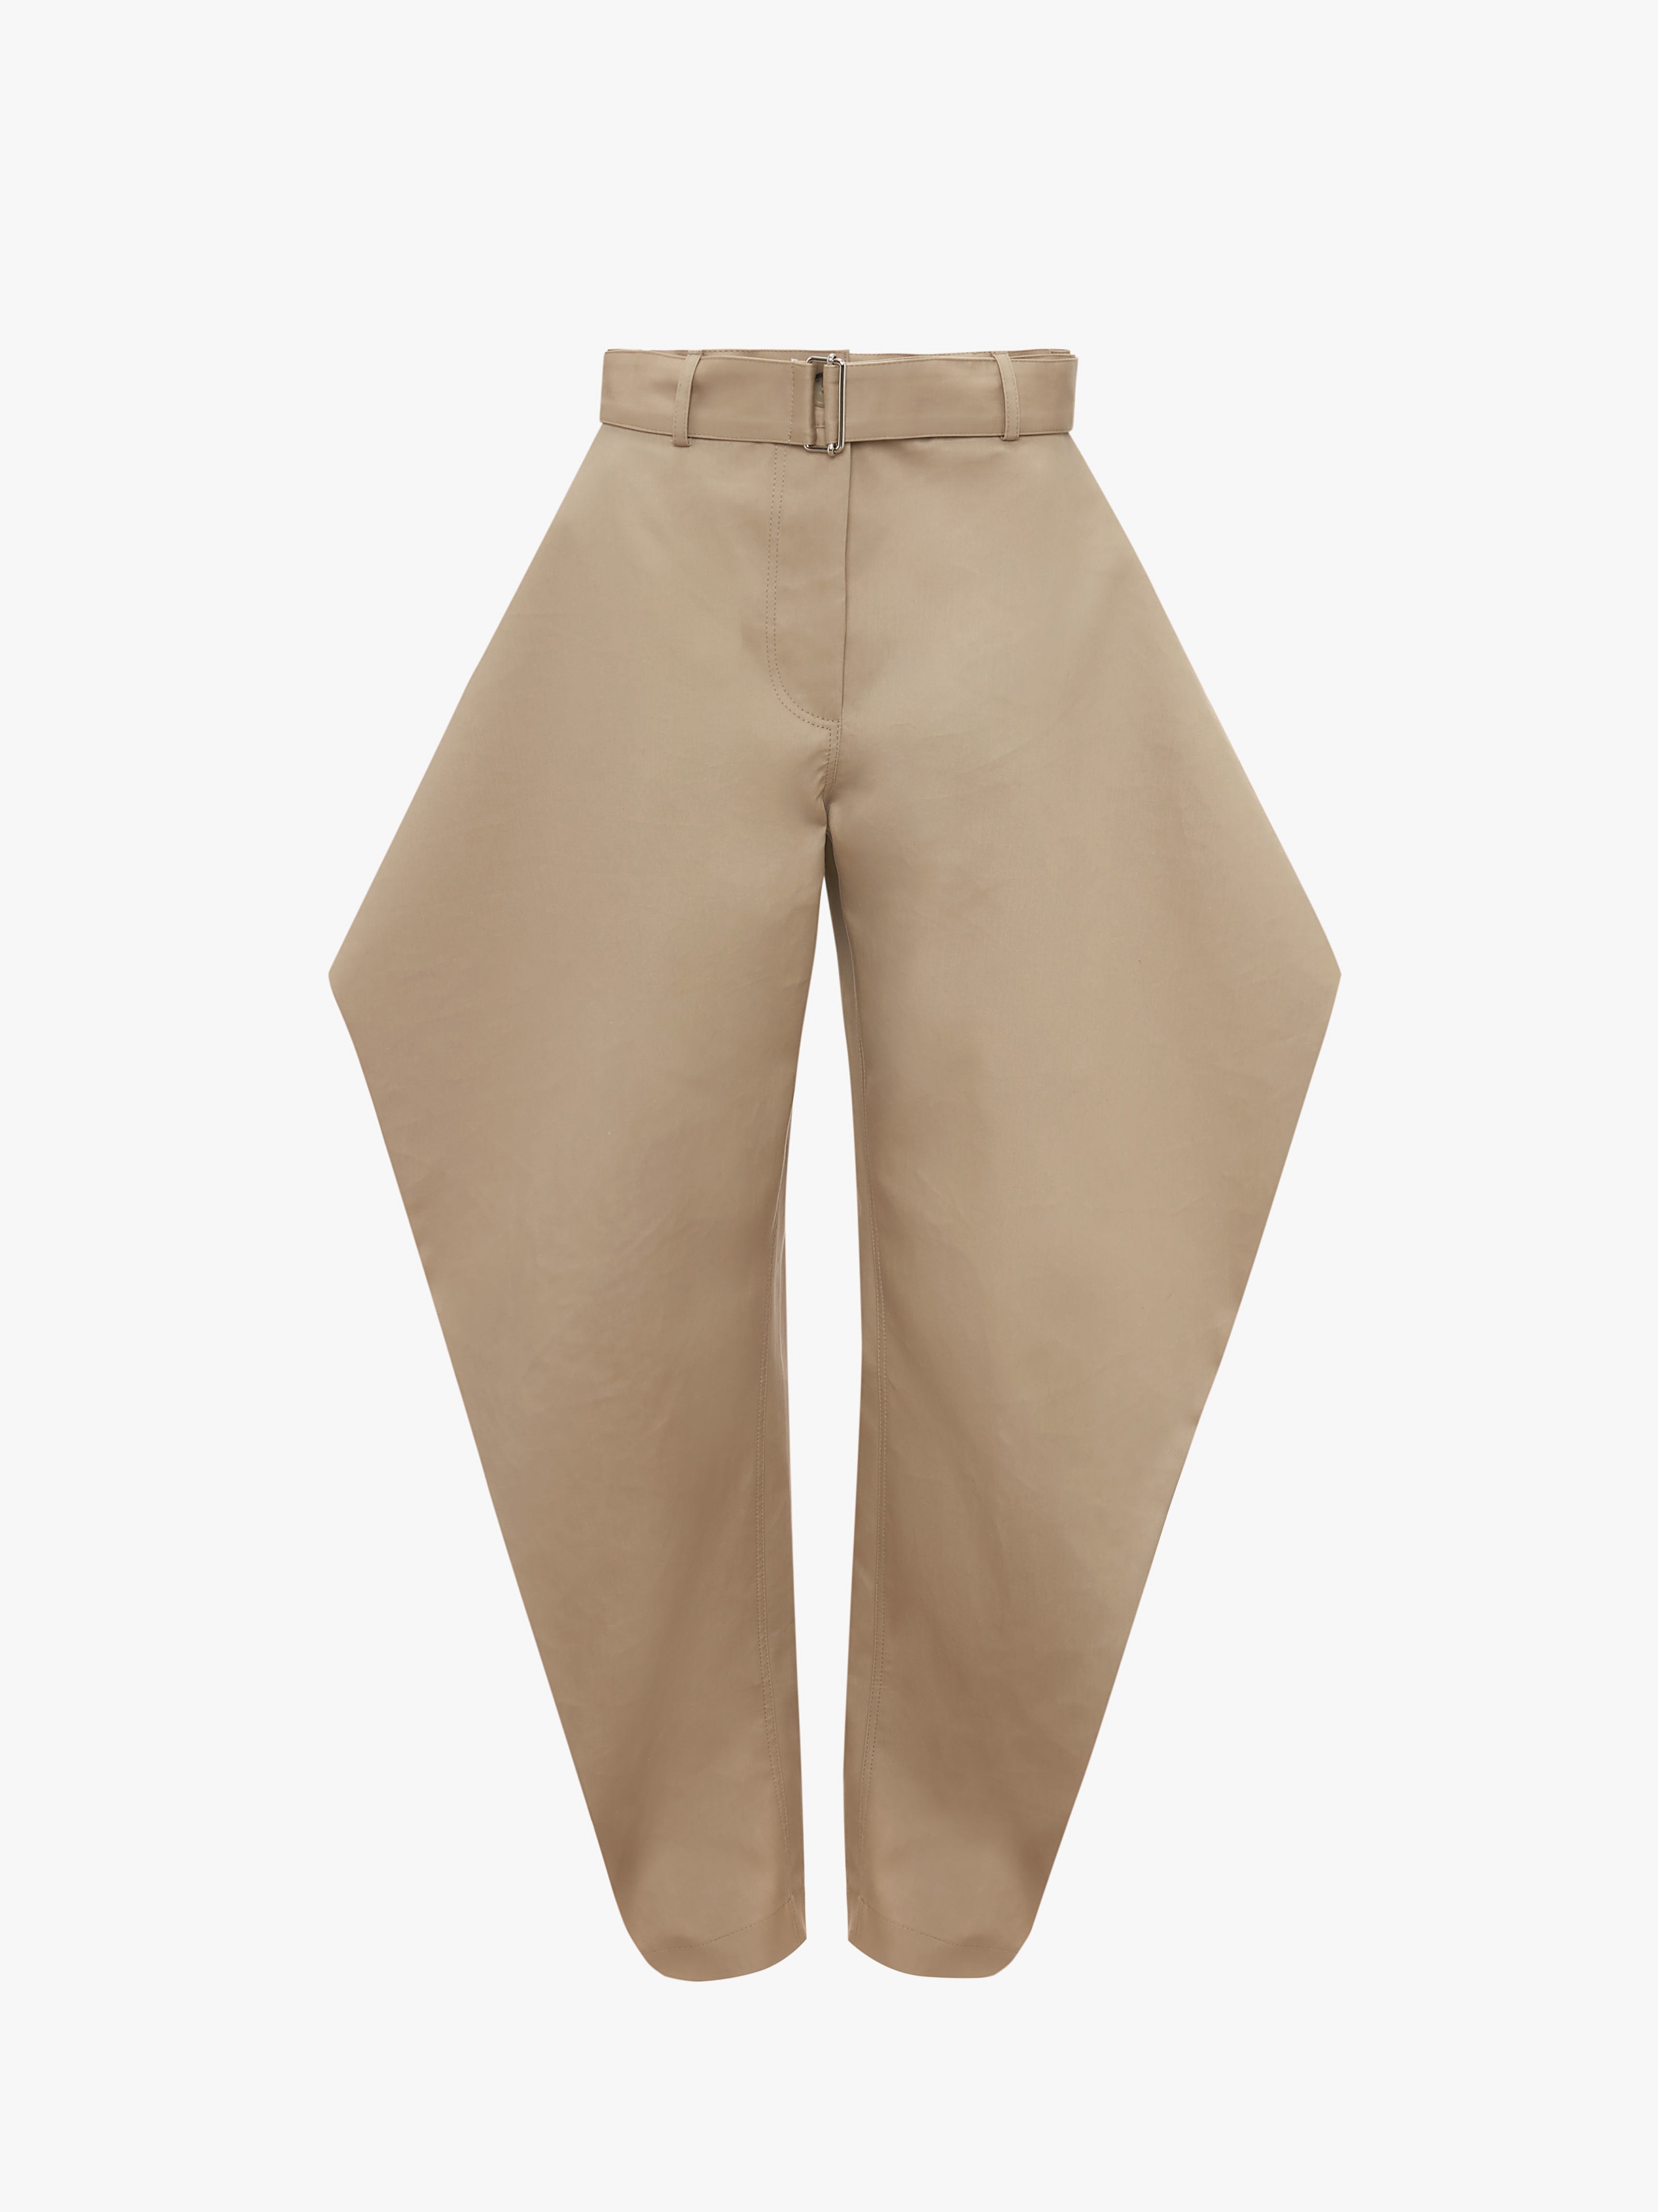 Rodebjer Flax Blend Annie Trousers With Belt Loops In Neutral | ModeSens